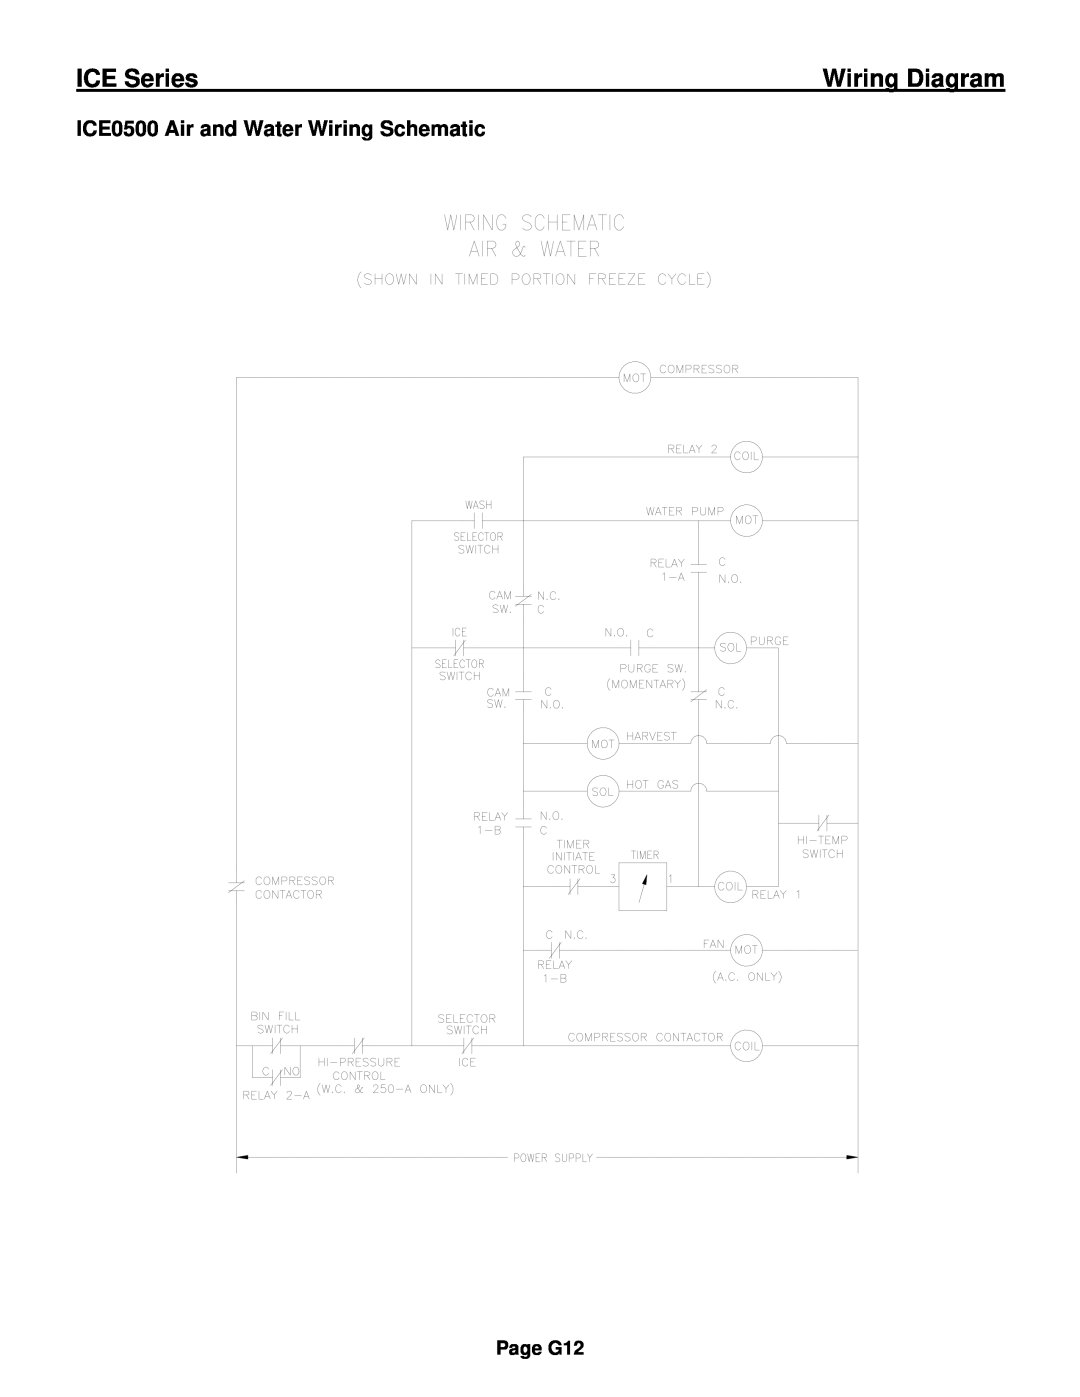 Ice-O-Matic ICE0250 Series installation manual ICE0500 Air and Water Wiring Schematic, ICE Series, Wiring Diagram, Page G12 